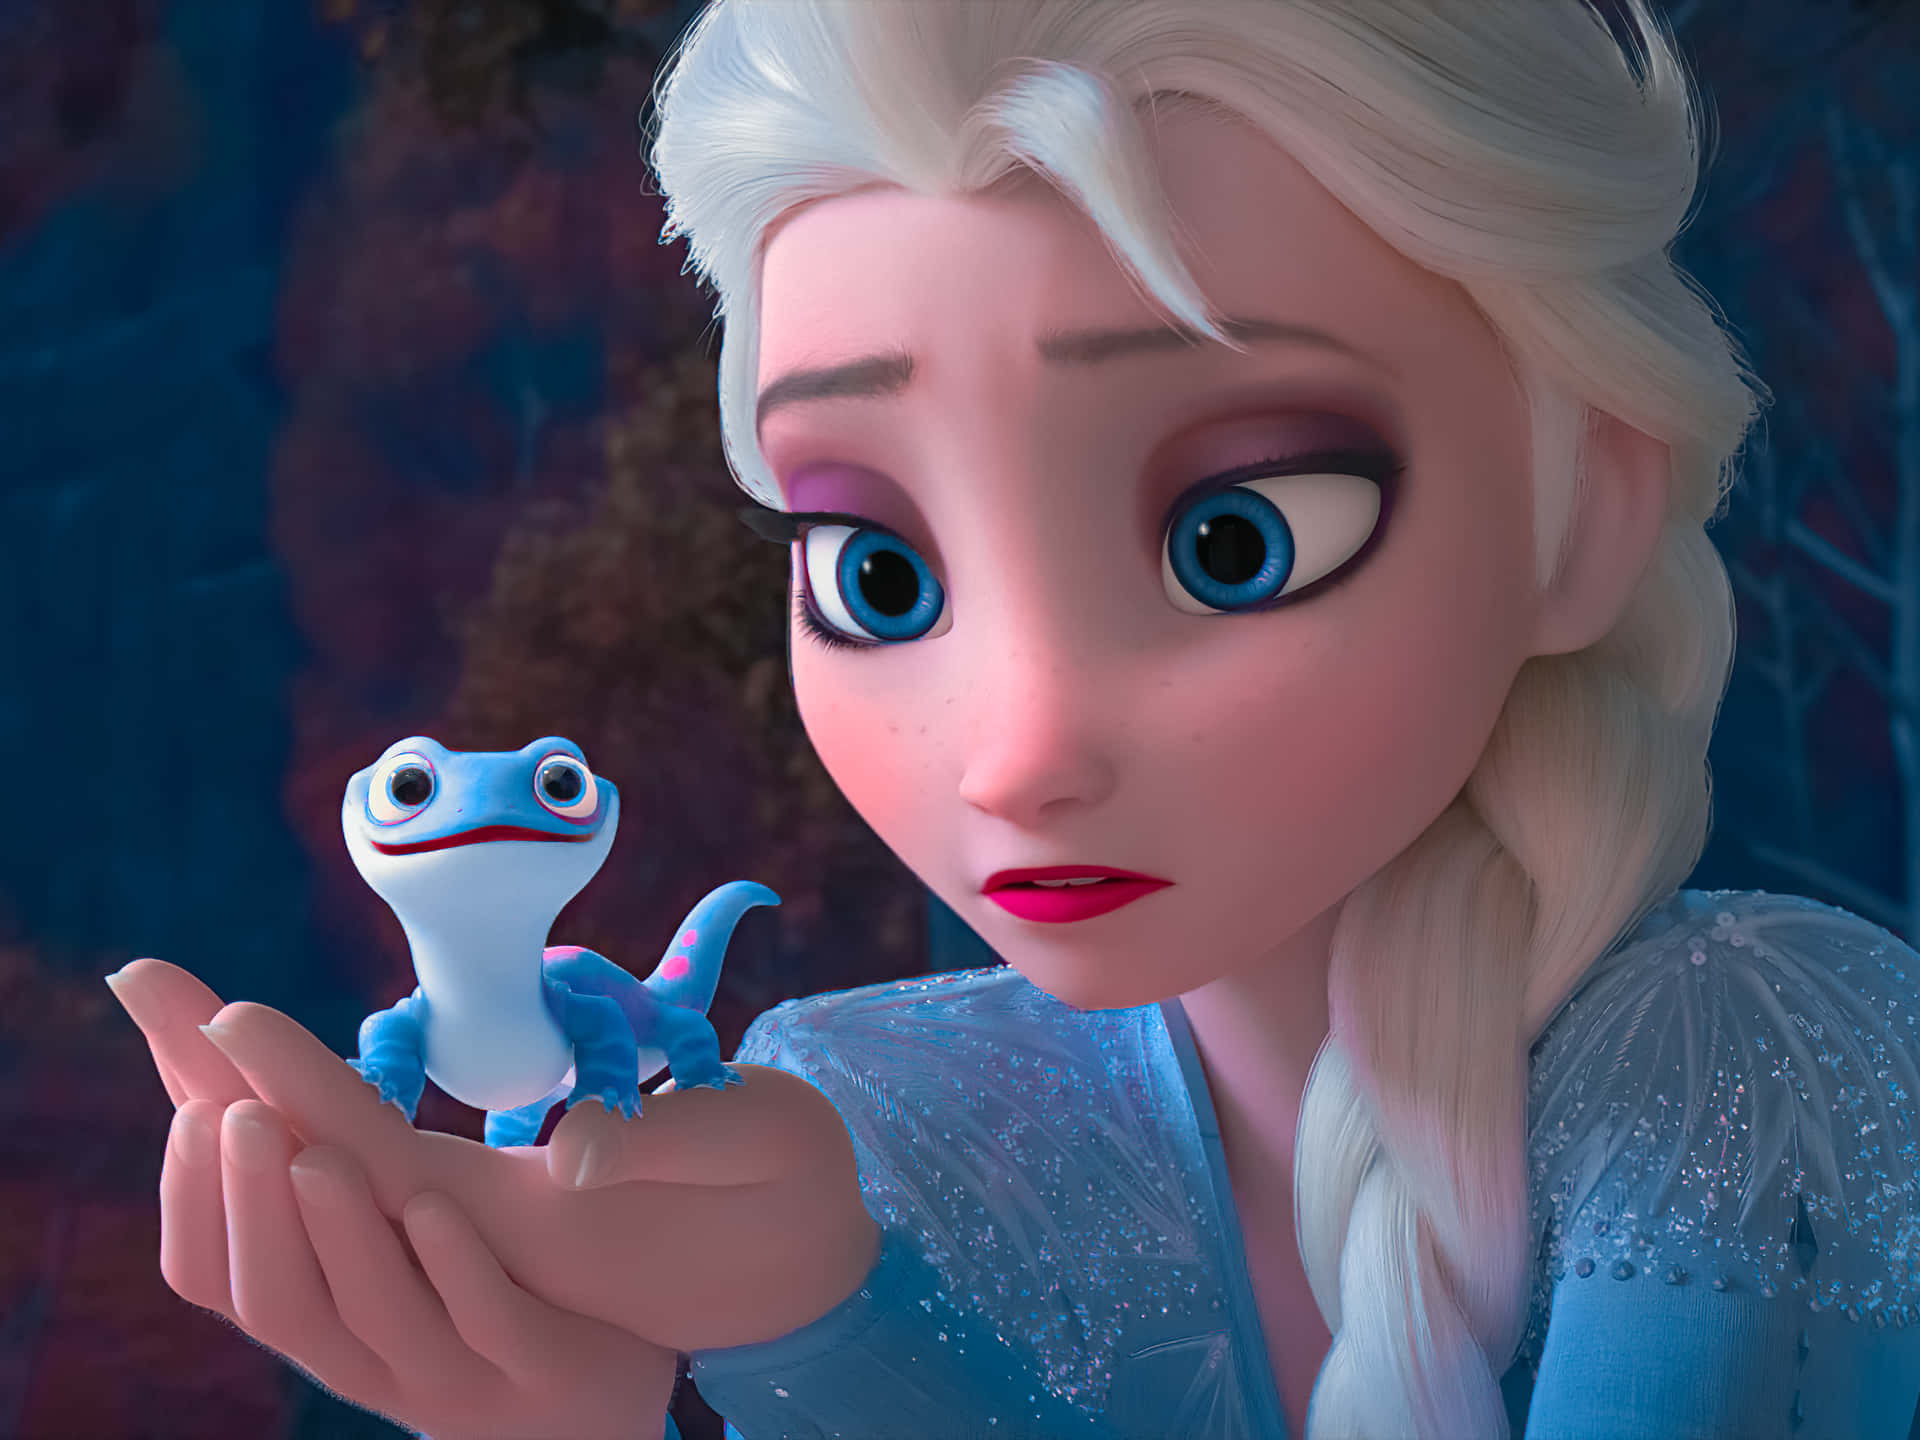 "Be the person you want to be with Elsa"